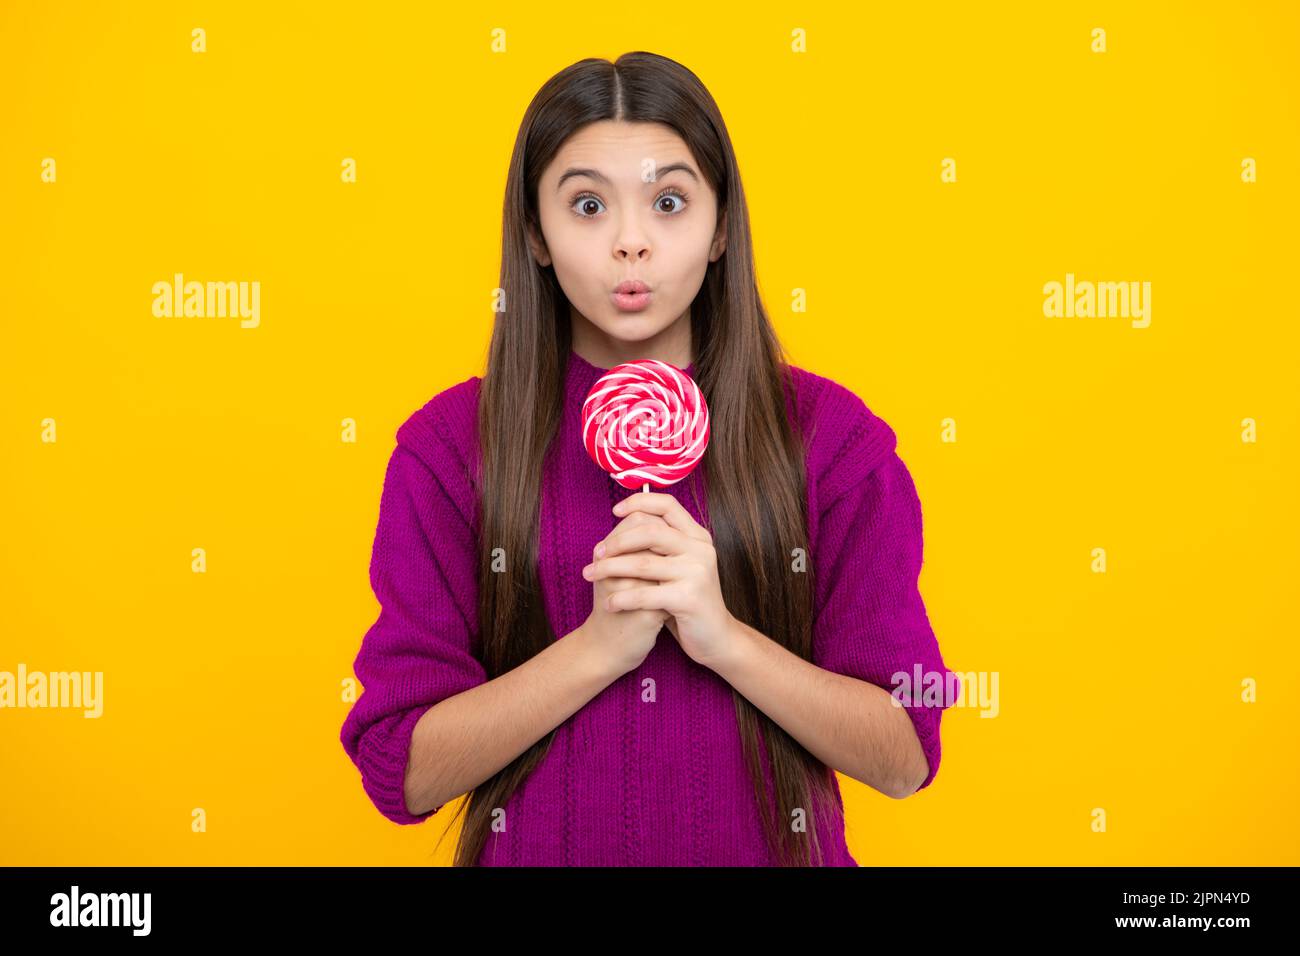 Teenage girl with lollipop, child eating sugar lollipops, kids sweets candy shop. Excited teenager girl. Surprised emotions of young teenager girl. Stock Photo